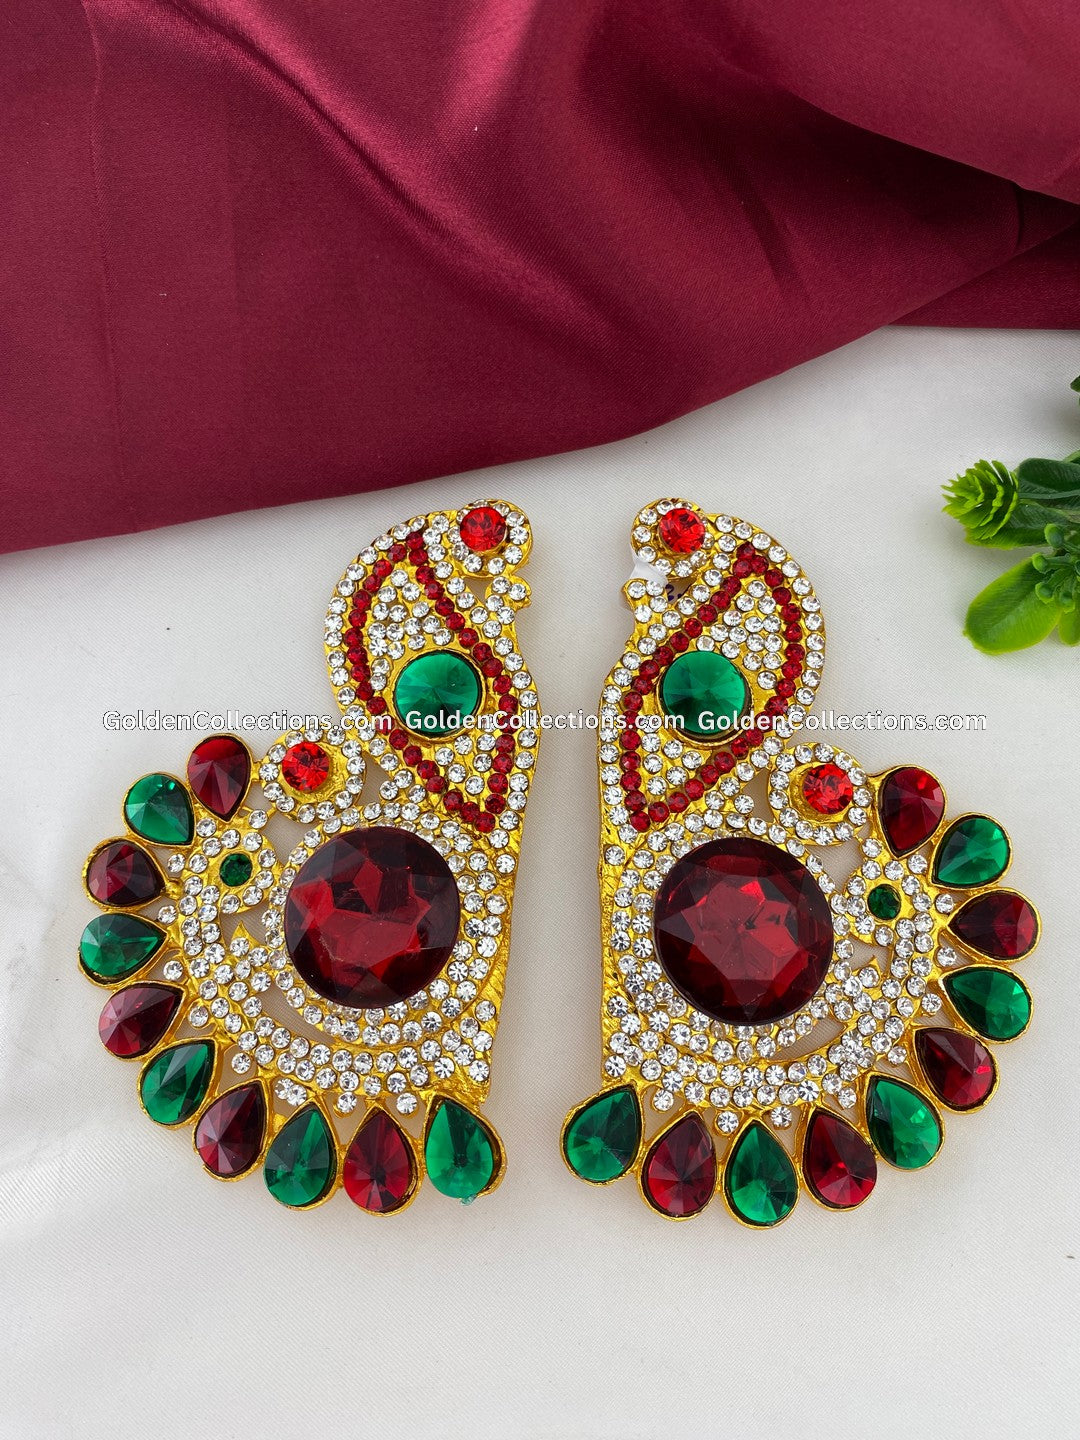 Deity Earrings - Divine Ornaments - GoldenCollections DGE-038